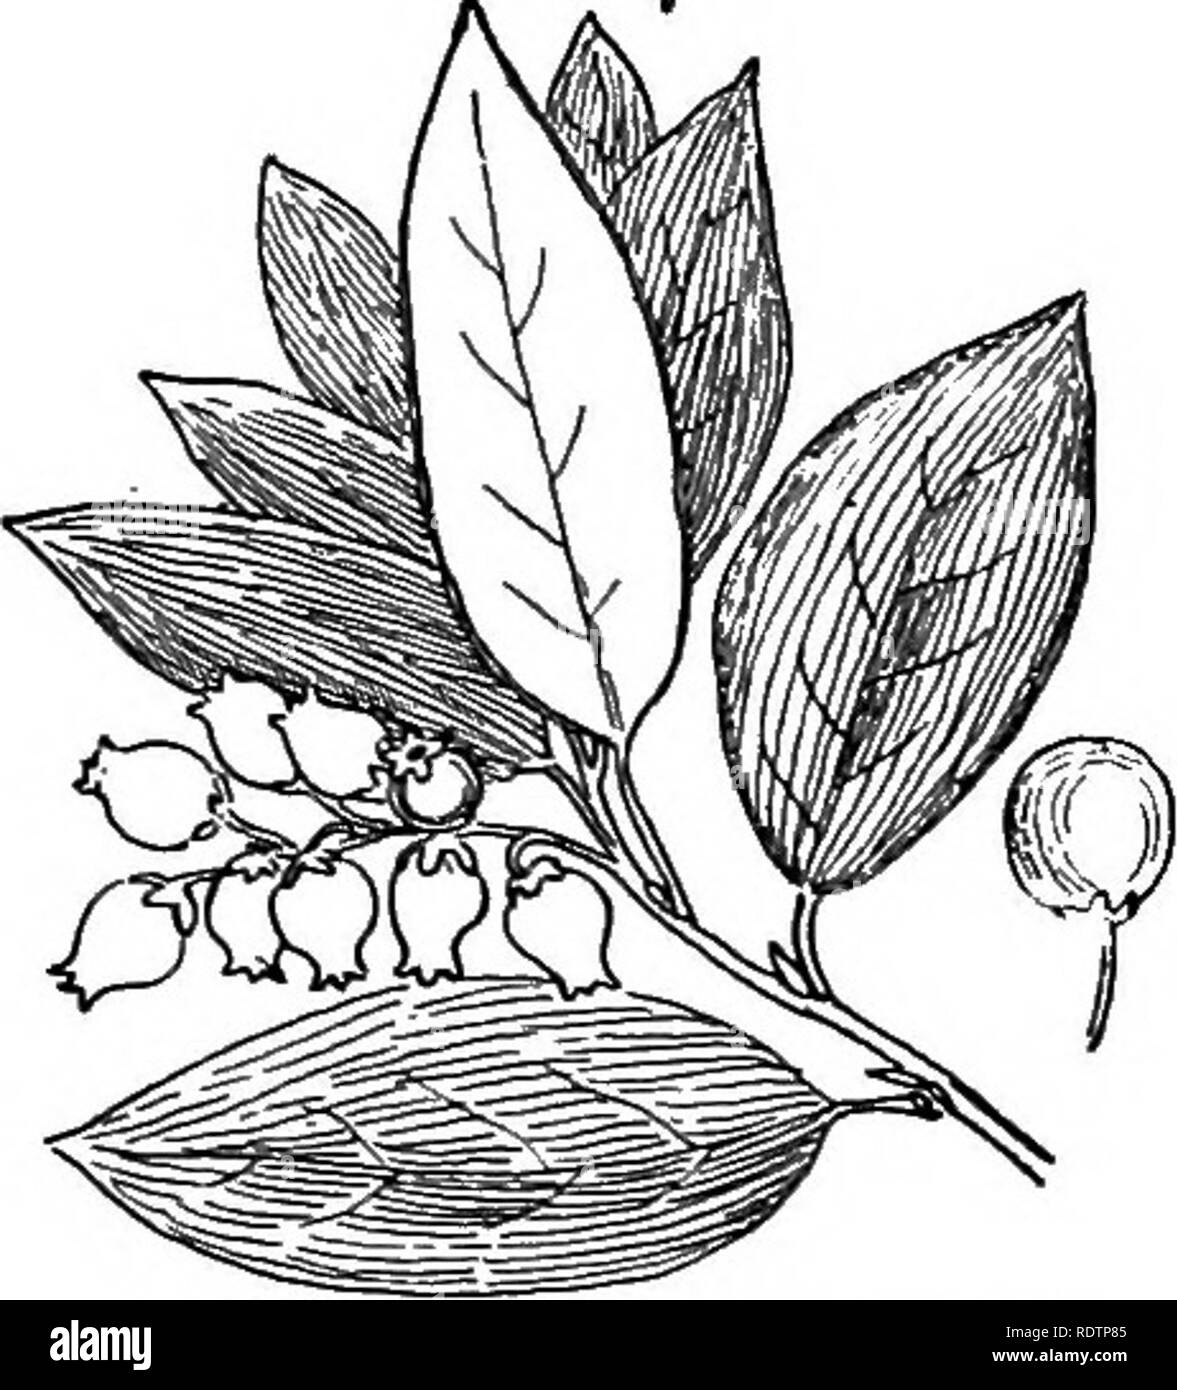 . Ornamental shrubs of the United States (hardy, cultivated). Shrubs. Fig. 414. — PriDgle's Arcto- staphylos. Fig. 415. — Bicolored Arcto- staphylos. KEY OF FORMS OF AECTOSTAPHYLOS FROM THE PACIFIC REGION HARDY ONLY SOUTH * Leaves smooth and fruit on smooth stems. (A.) A. Floweis in umbel-like clusters ; shrub 3-10 feet. Downy Arc- TosTAPHYLOs (410) — Arotostaphylos piingens. A. Flowers in elongated clusters; shrub or tree to 30 feet. Man- ZANITA (411) — Arctostaphylos Manzanita. * Leaves smooth ; fruit stems glandular. (B.) B. Flowers in elongated clusters; shrub or tree 8-25 feet. Pale- leav Stock Photo